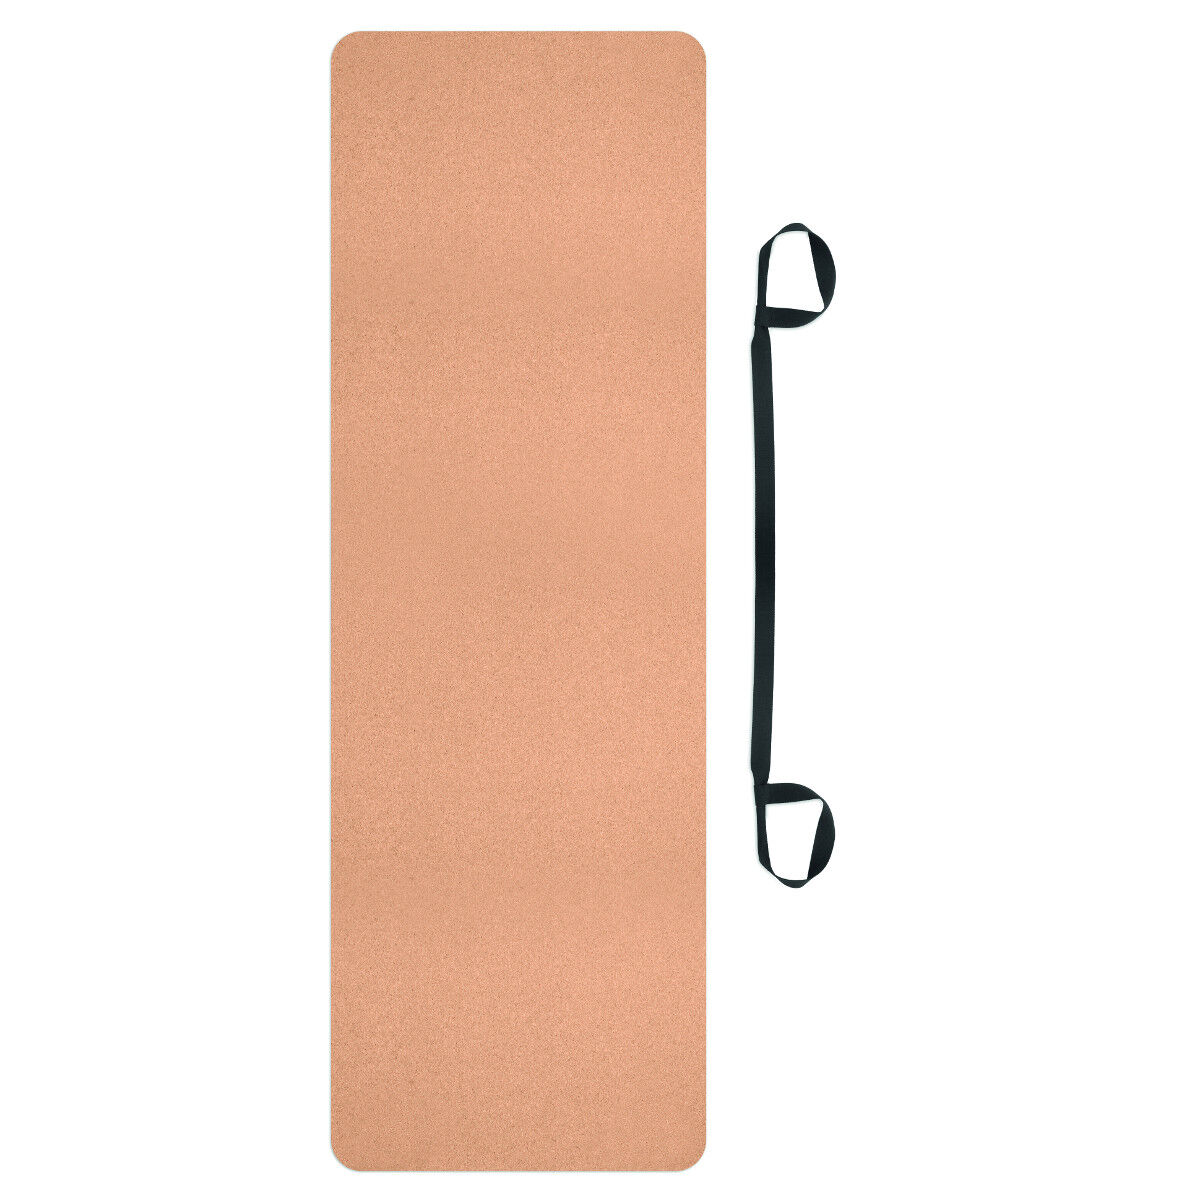 Yoga exercise mat made of cork material